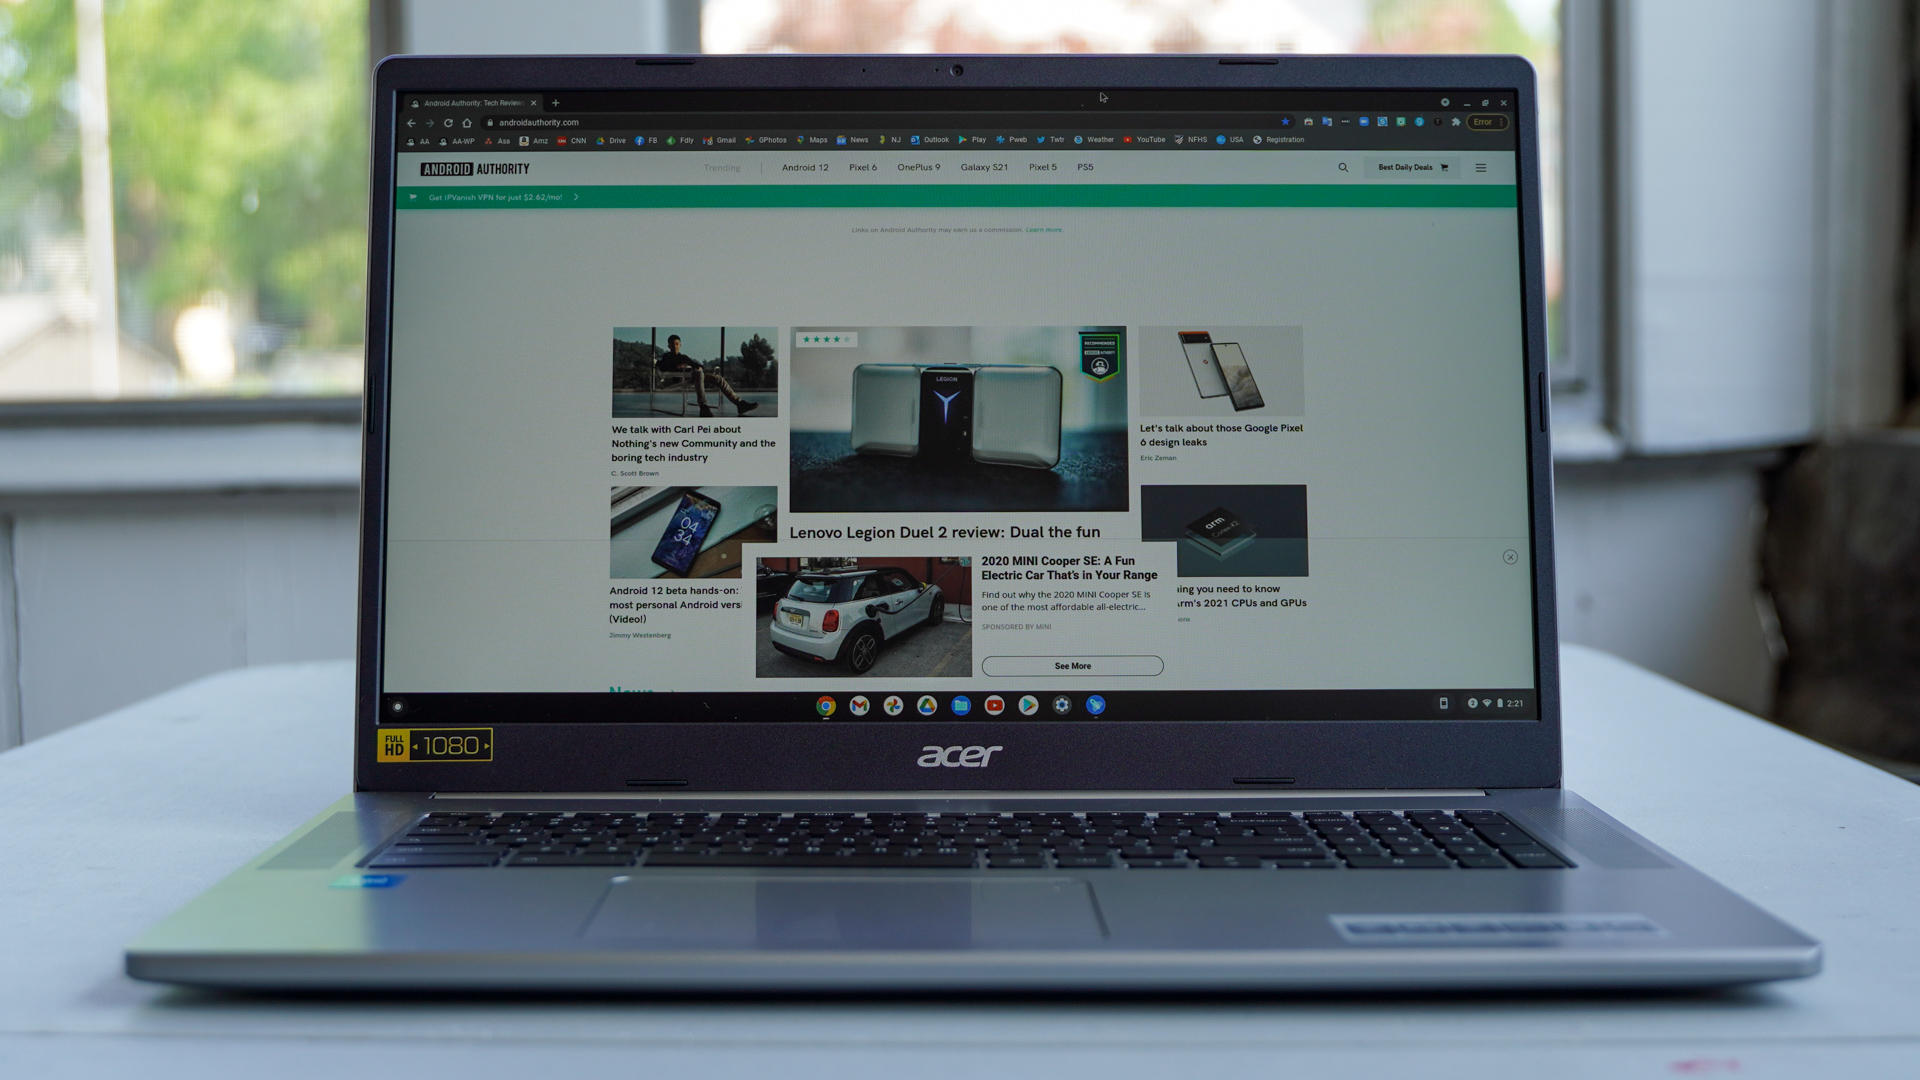 Acer Chromebook 317 hands-on: A look at the first 17-inch Chromebook